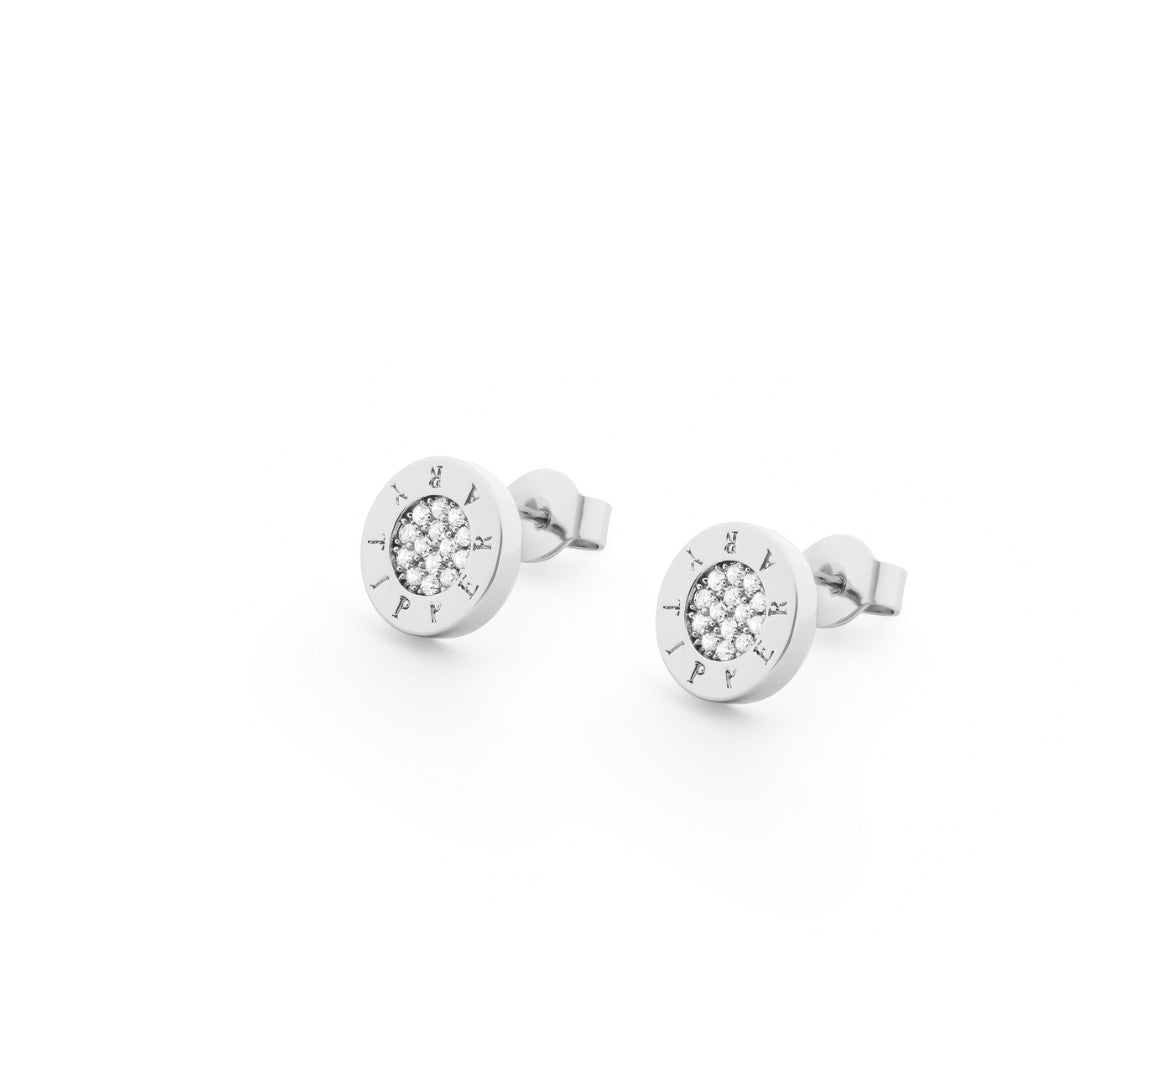 Tipperary Crystal Earrings - Pavé Circle Collection - Circle Pave Stud - Silver Plated